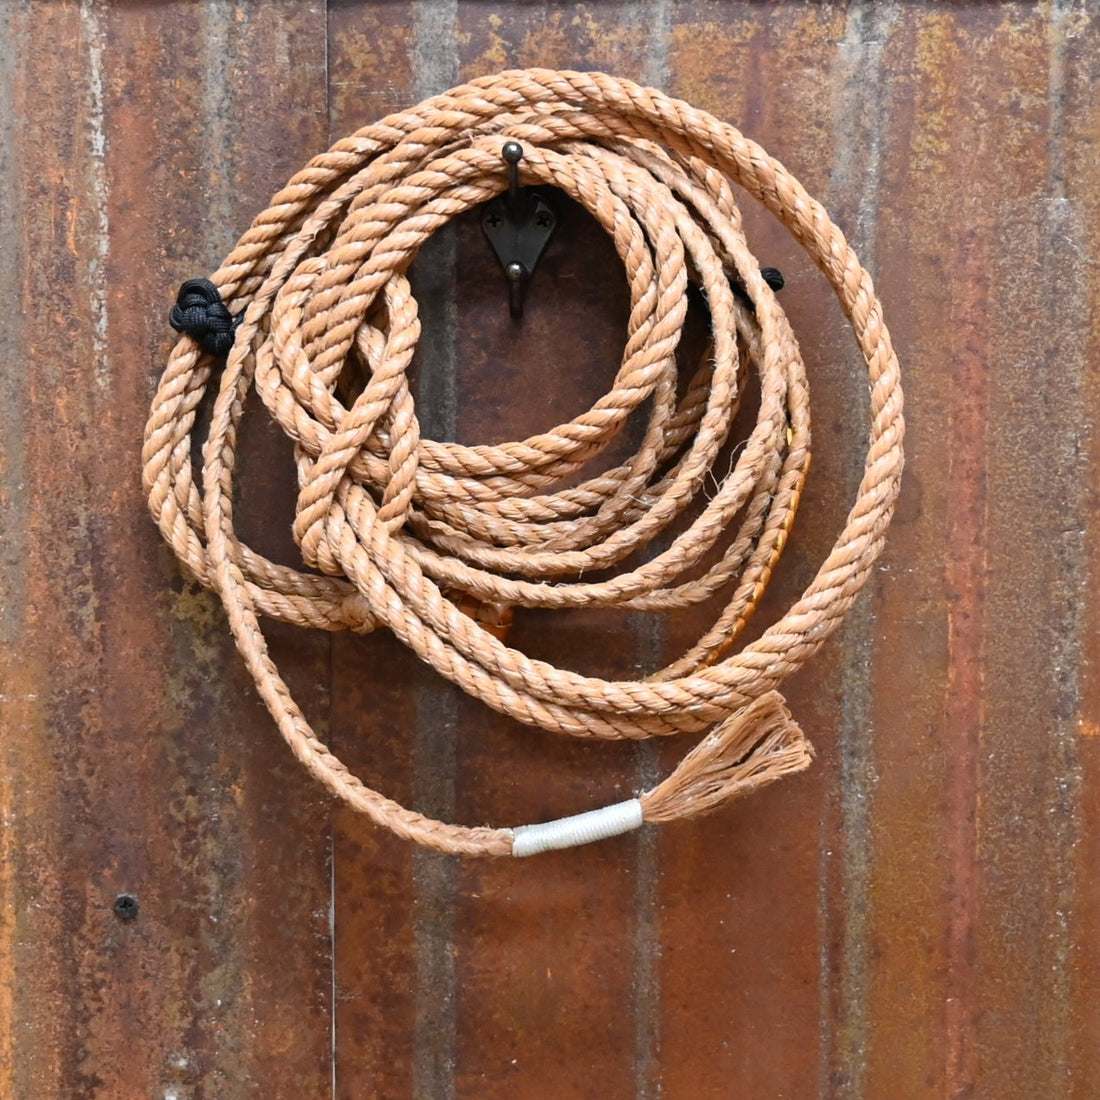 Barstow Pro Rodeo Jr Calf Riding Rope - Left Handed view of rope